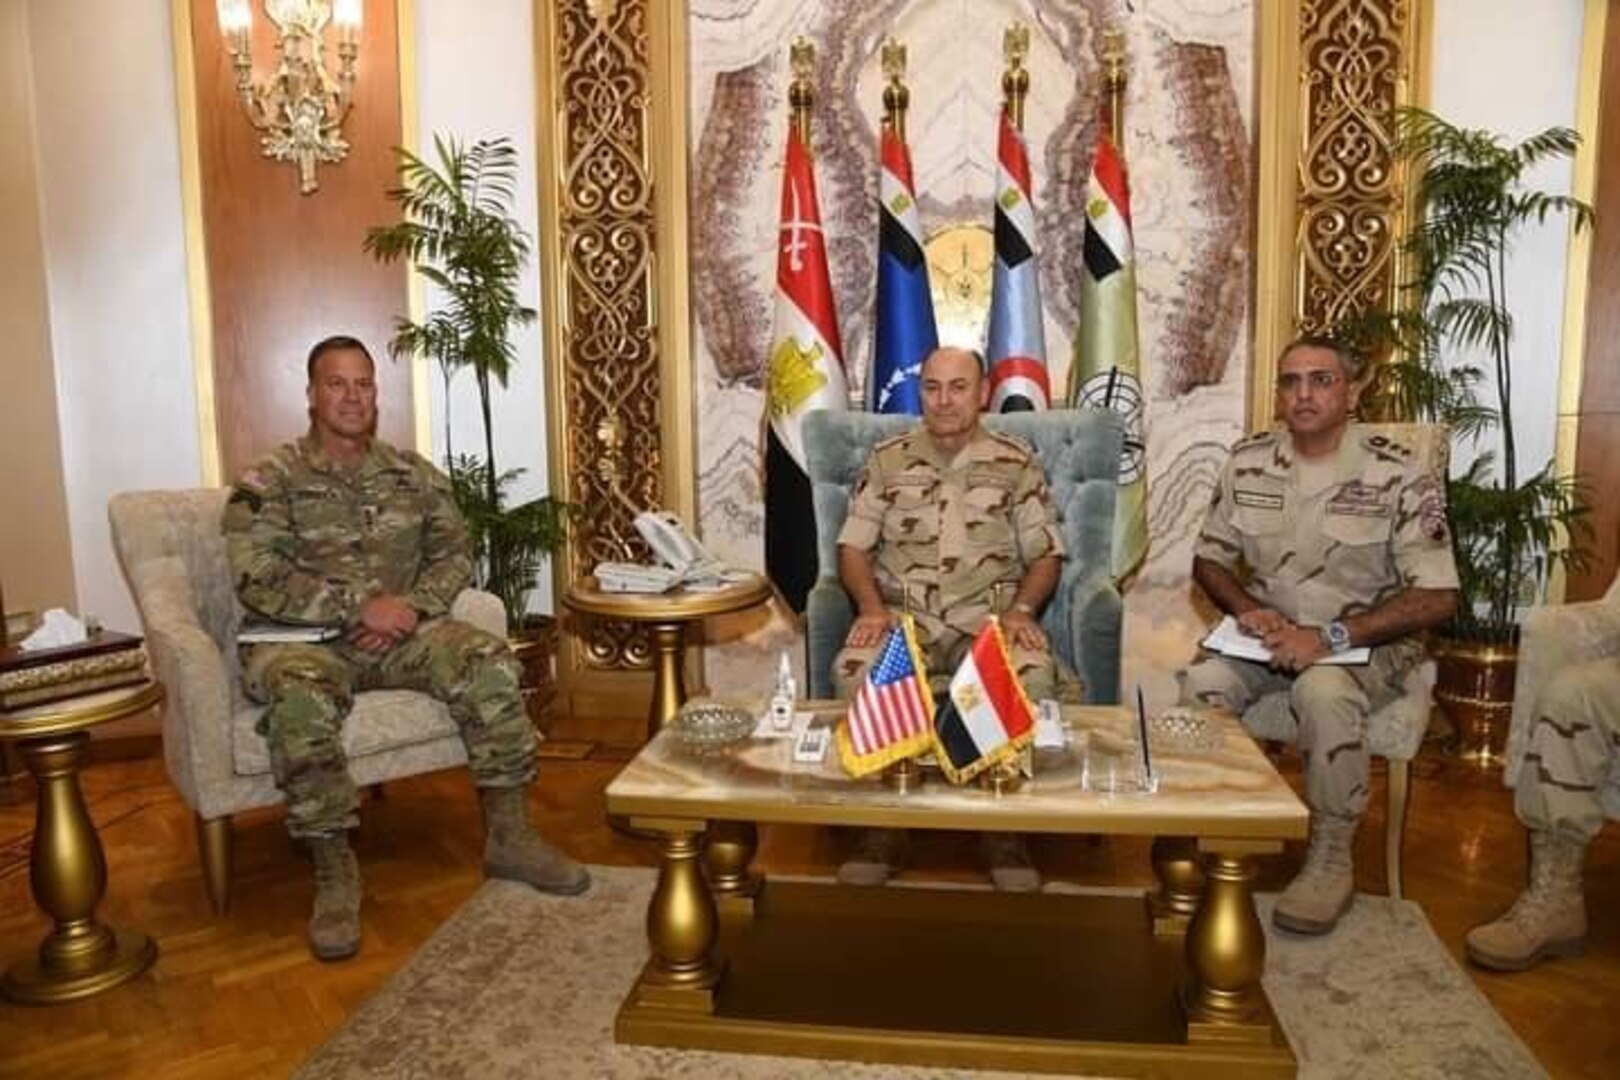 General Michael “Erik” Kurilla, commander of U.S. Central Command, visited with Egyptian Minister of Defense General Mohamed Zaki, and Lieutenant-General Osama Askar, Chief of Staff of the Armed Forces this week in Cairo. 
The leaders discussed mutual security concerns, to include methods to improve border security, opportunities to enhance partnered training for counterterror operations, and opportunities to strengthen the U.S.-Egypt military partnership.